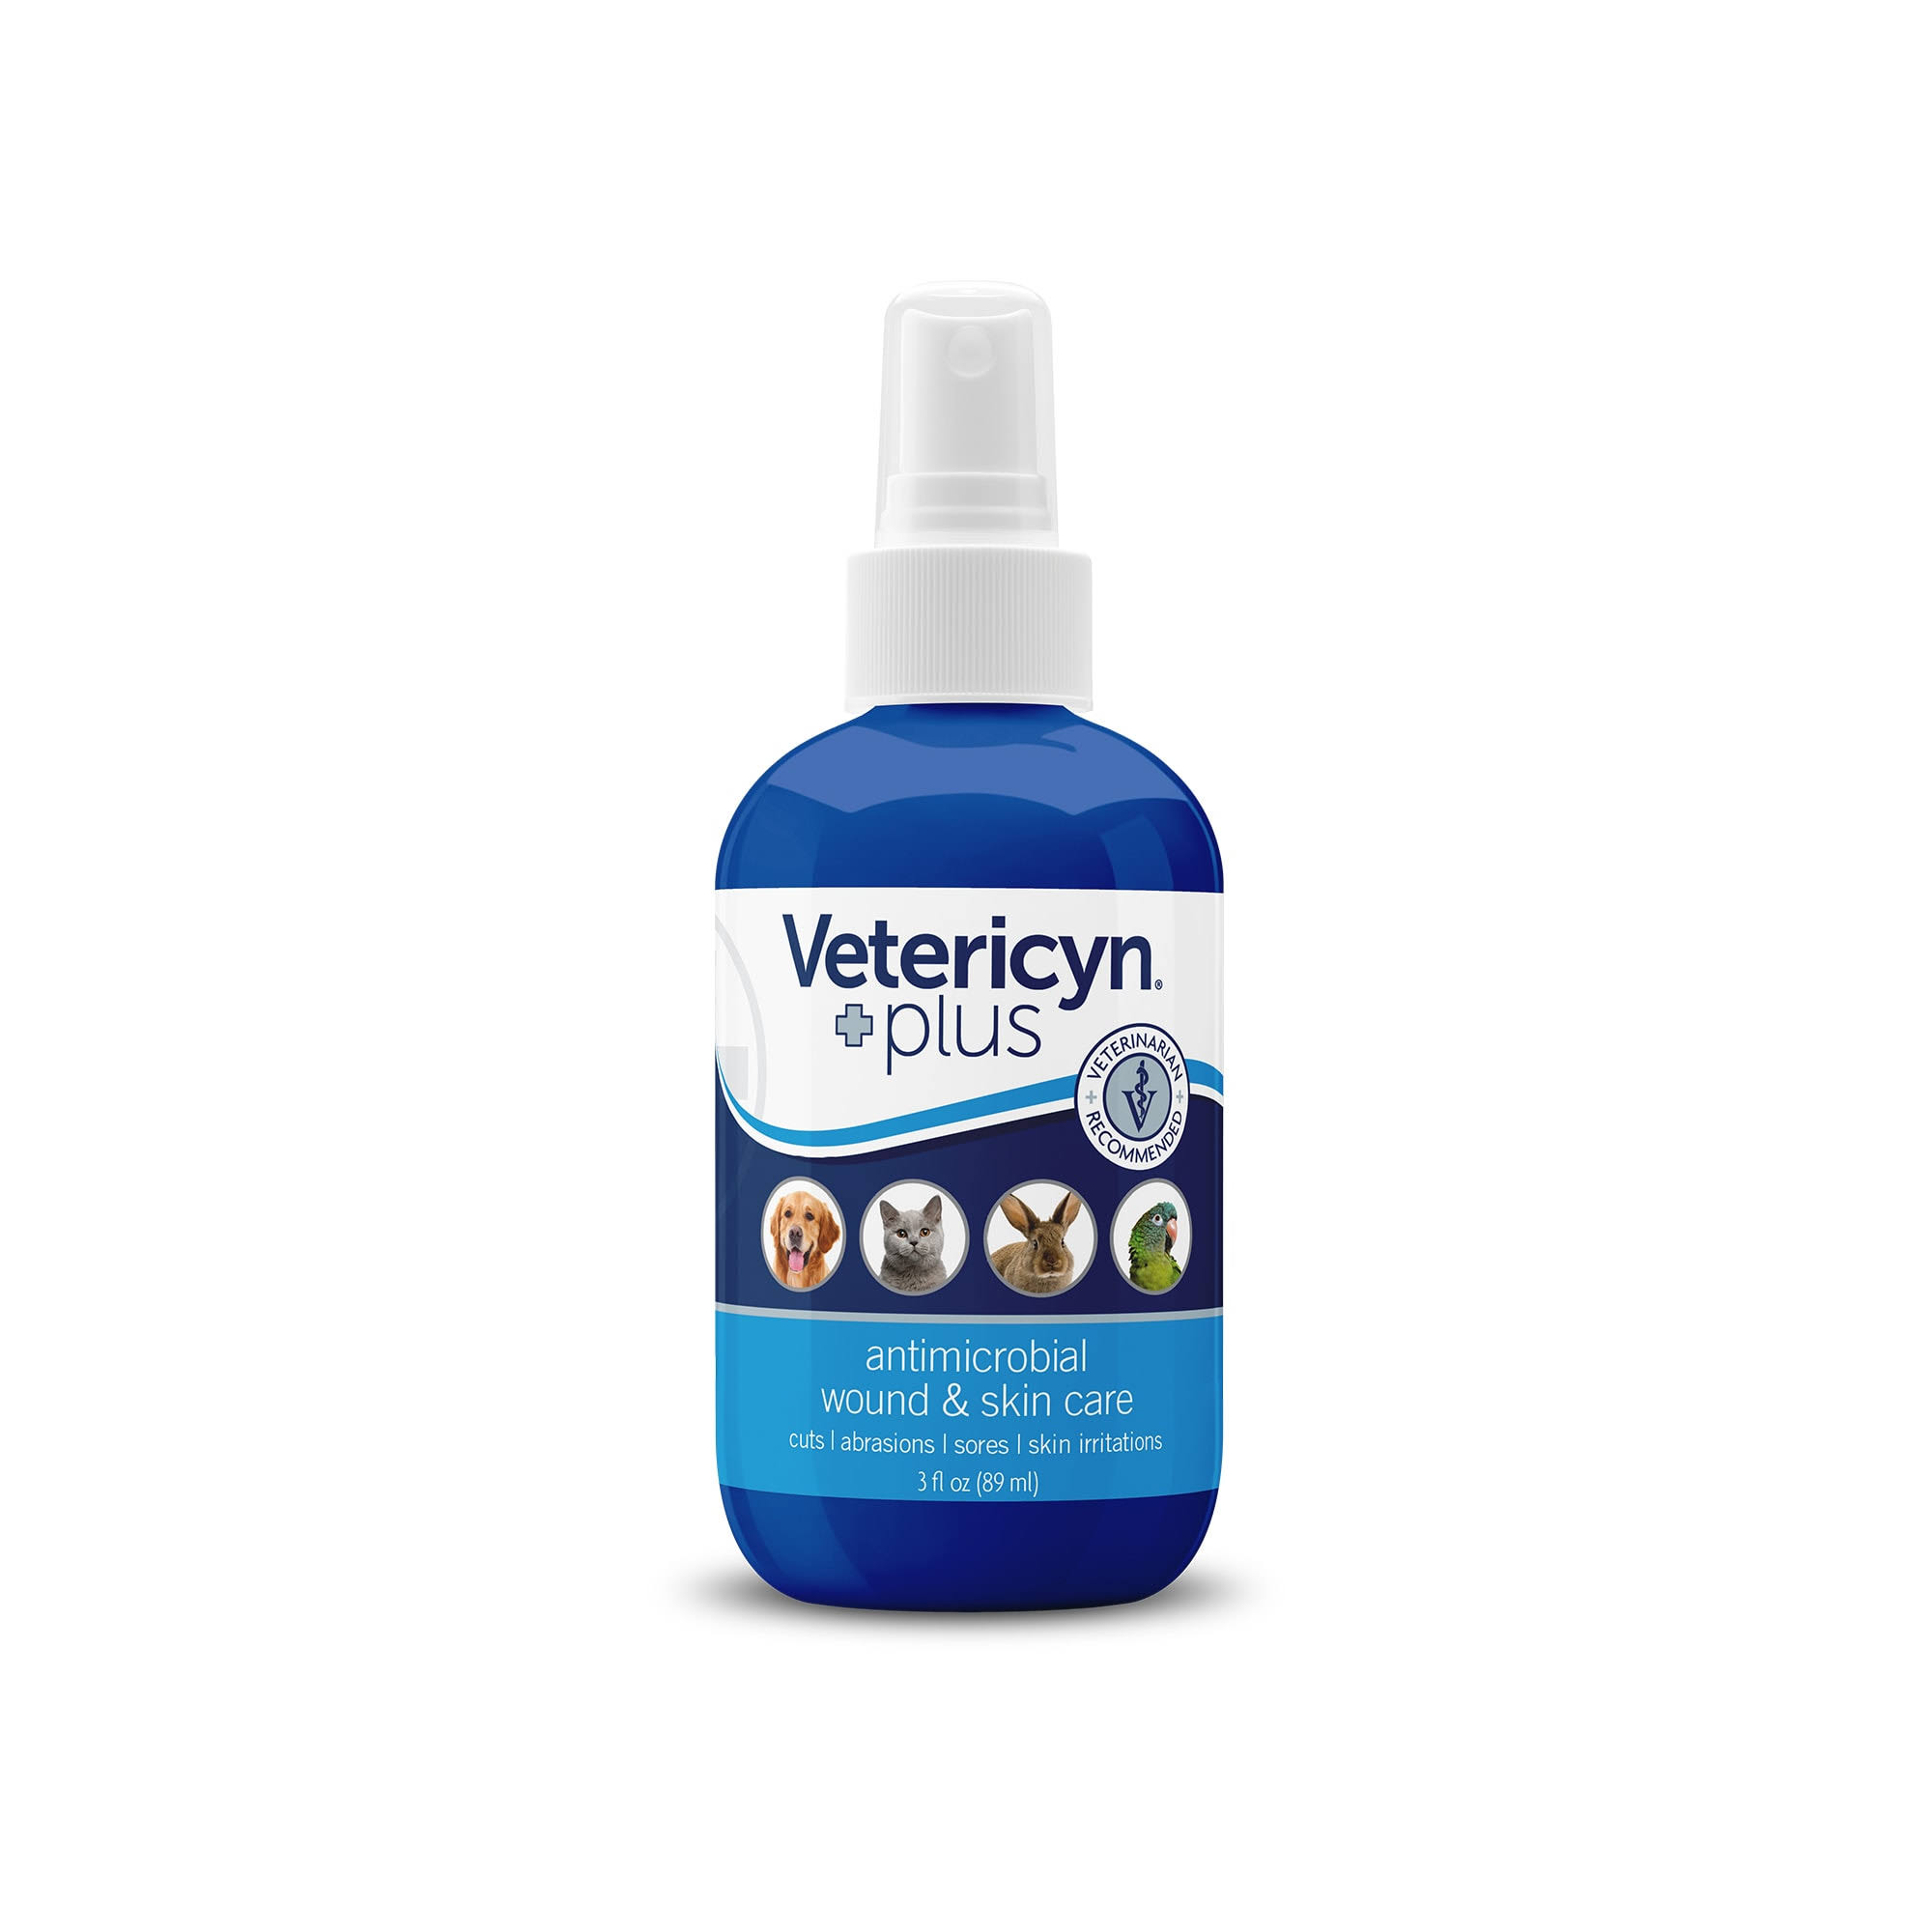 Vetericyn Wound and Skin Care Plus Traveler Bottle - 3 oz